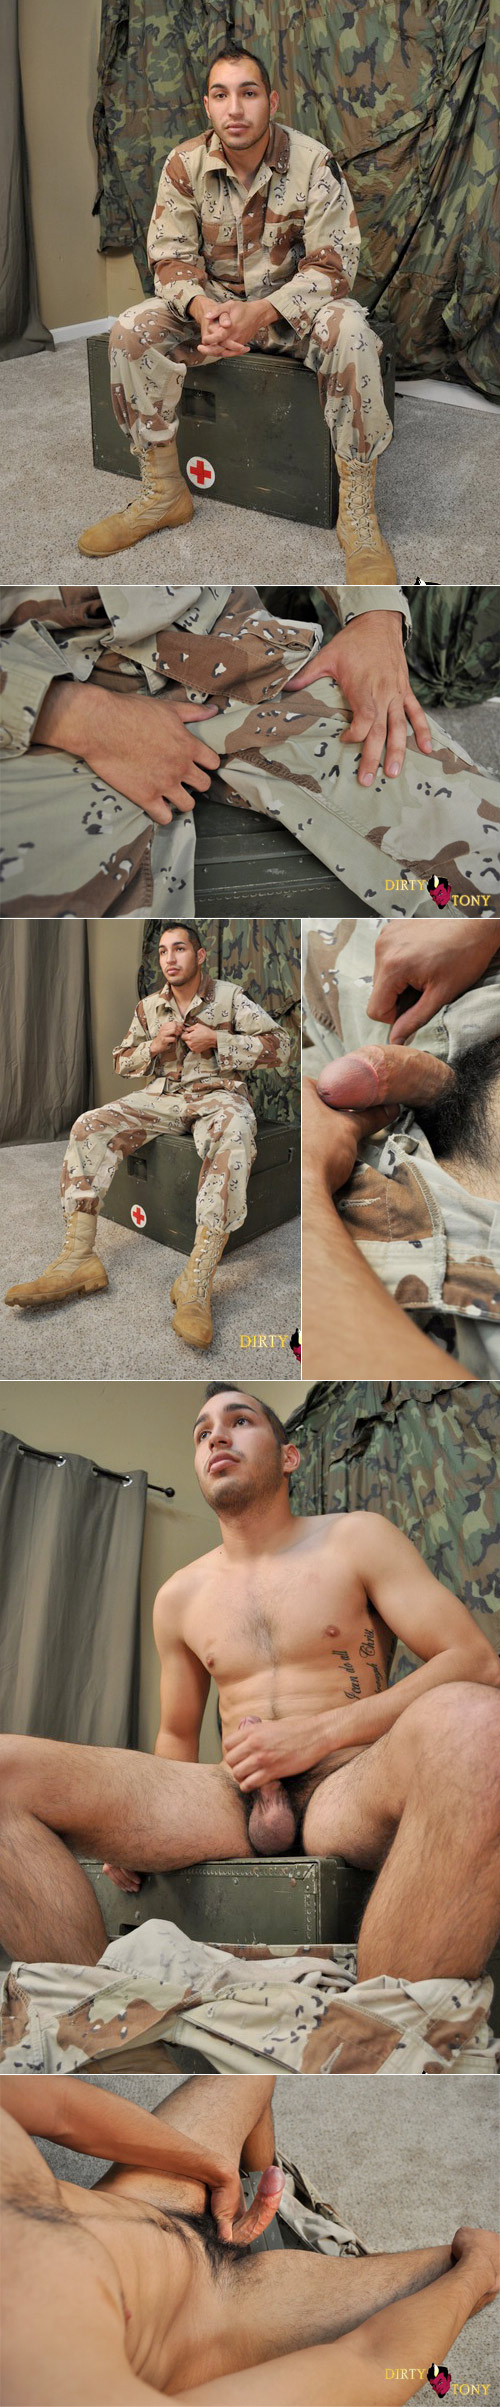 Infantry Specialist Marco at DirtyTony